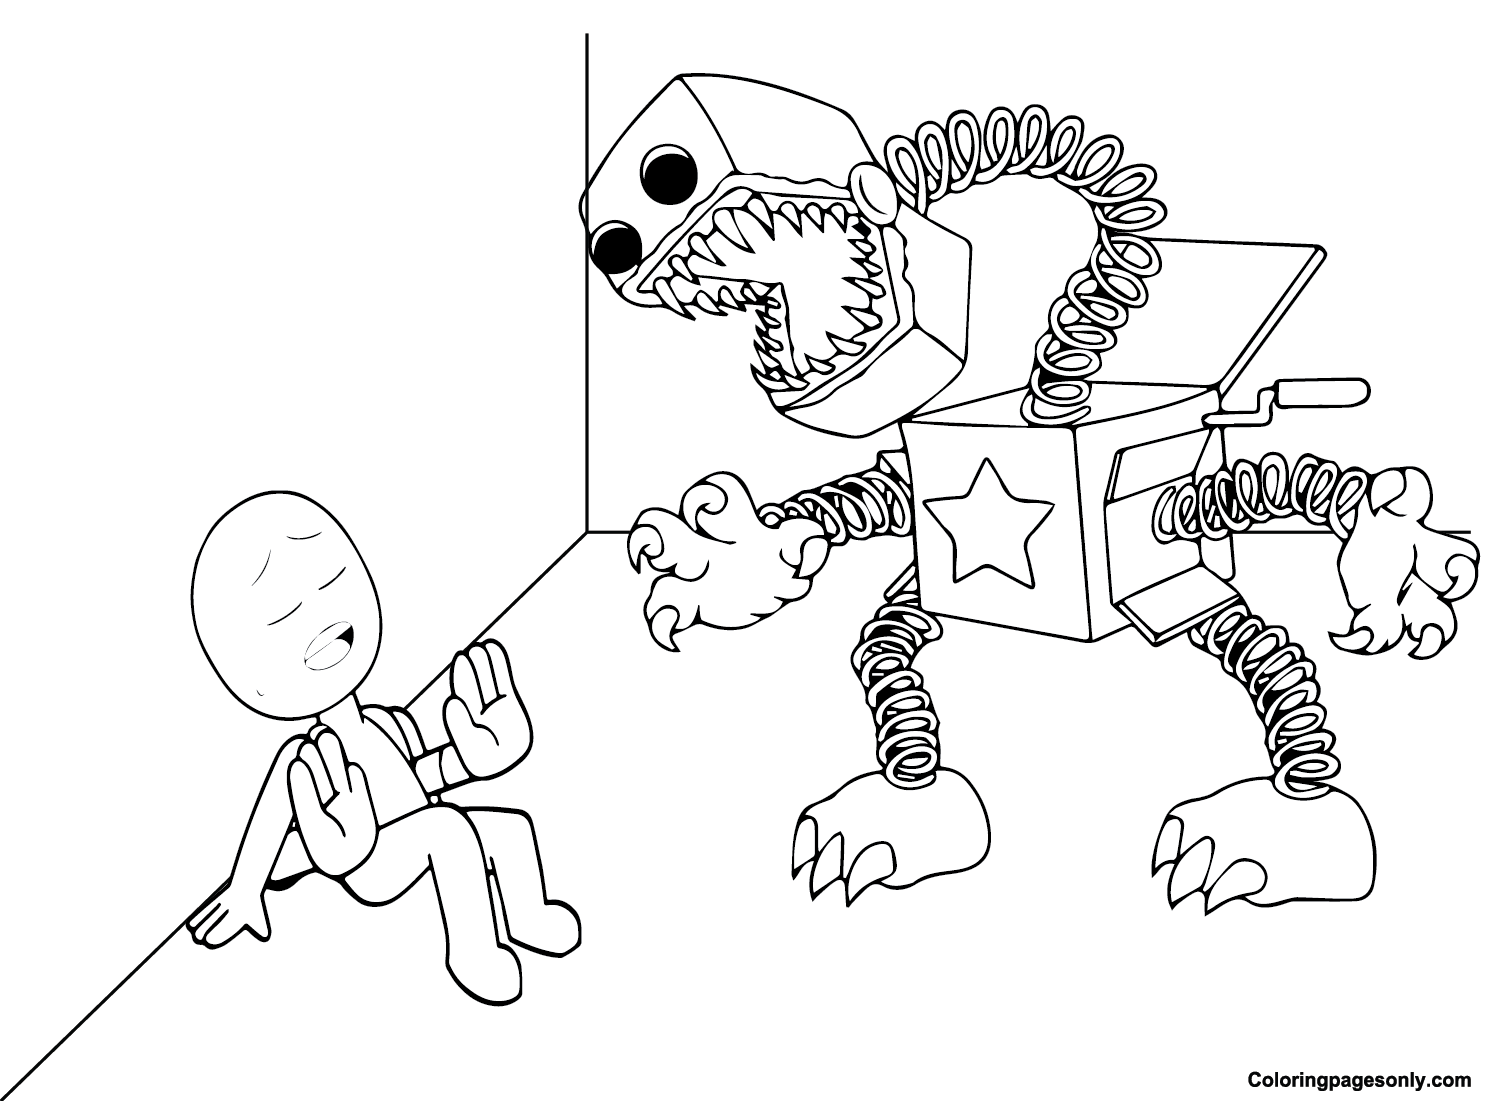 Boxy Boo Color Sheet Coloring Pages